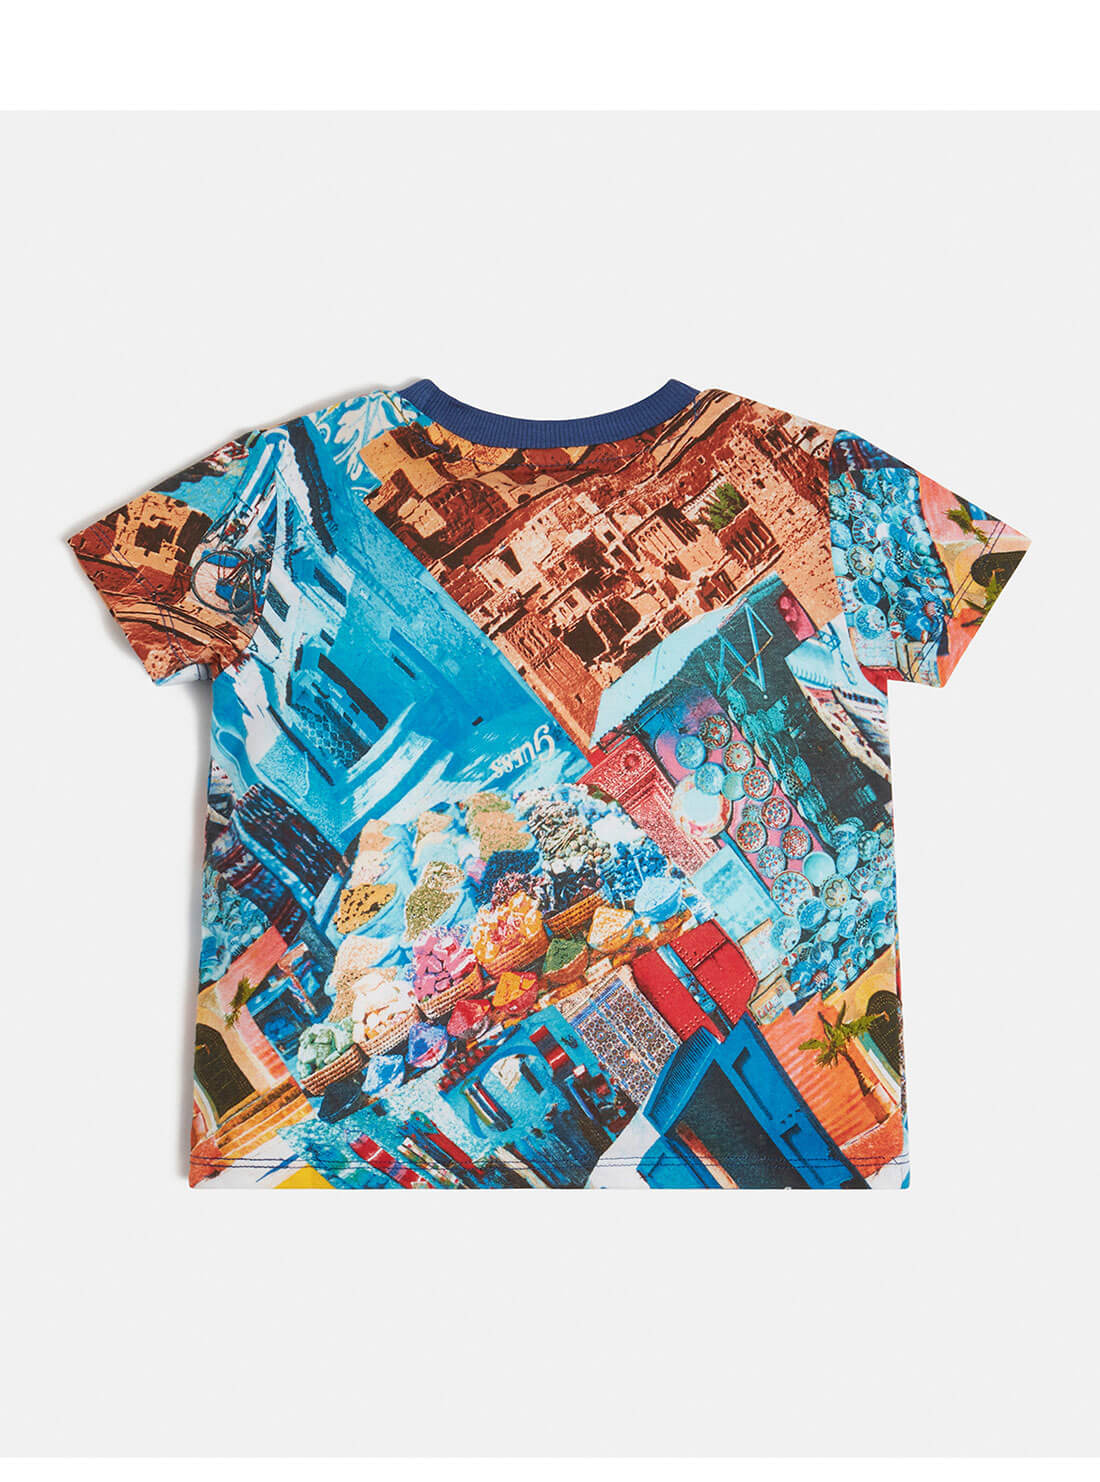 Boy's Graphic Patchwork T-Shirt (2-7) back view